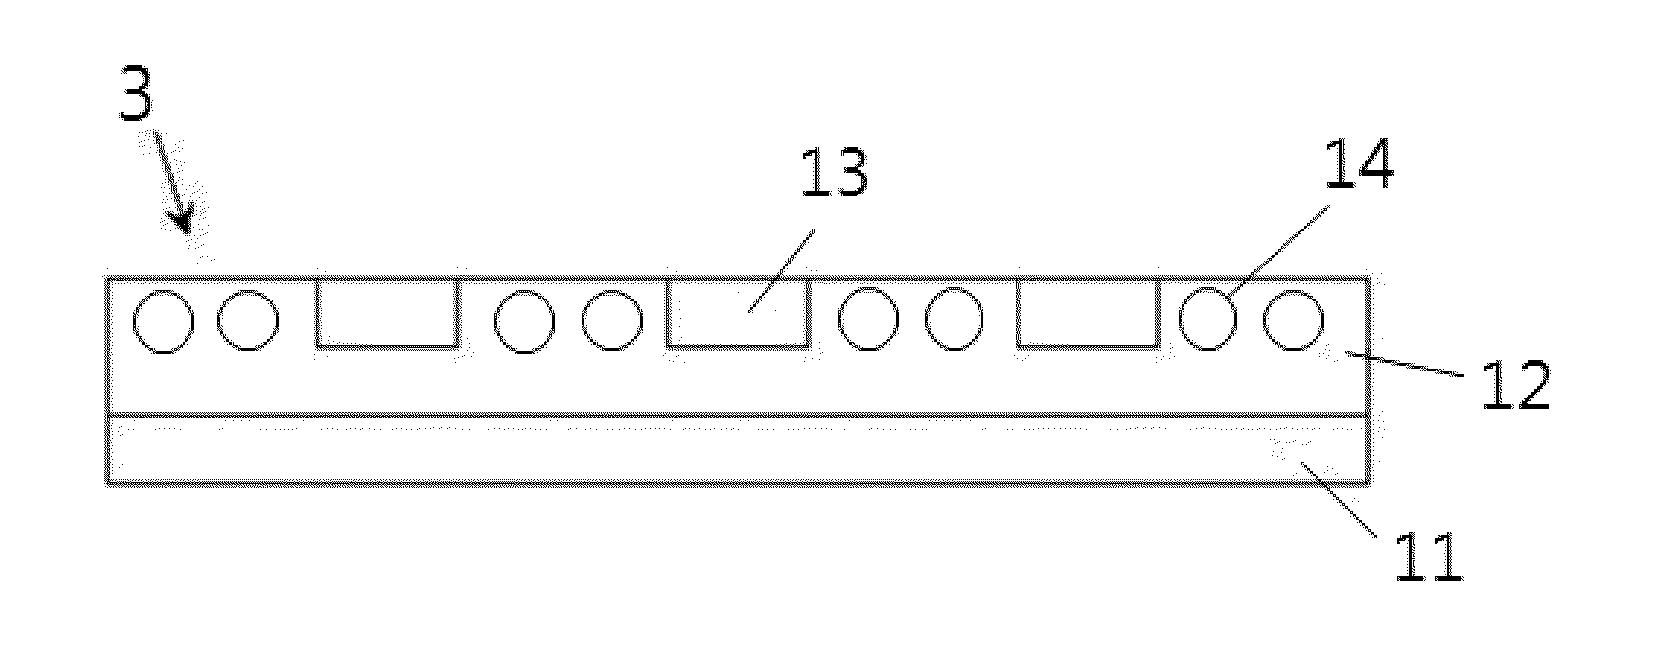 Substrate for organic electronic device